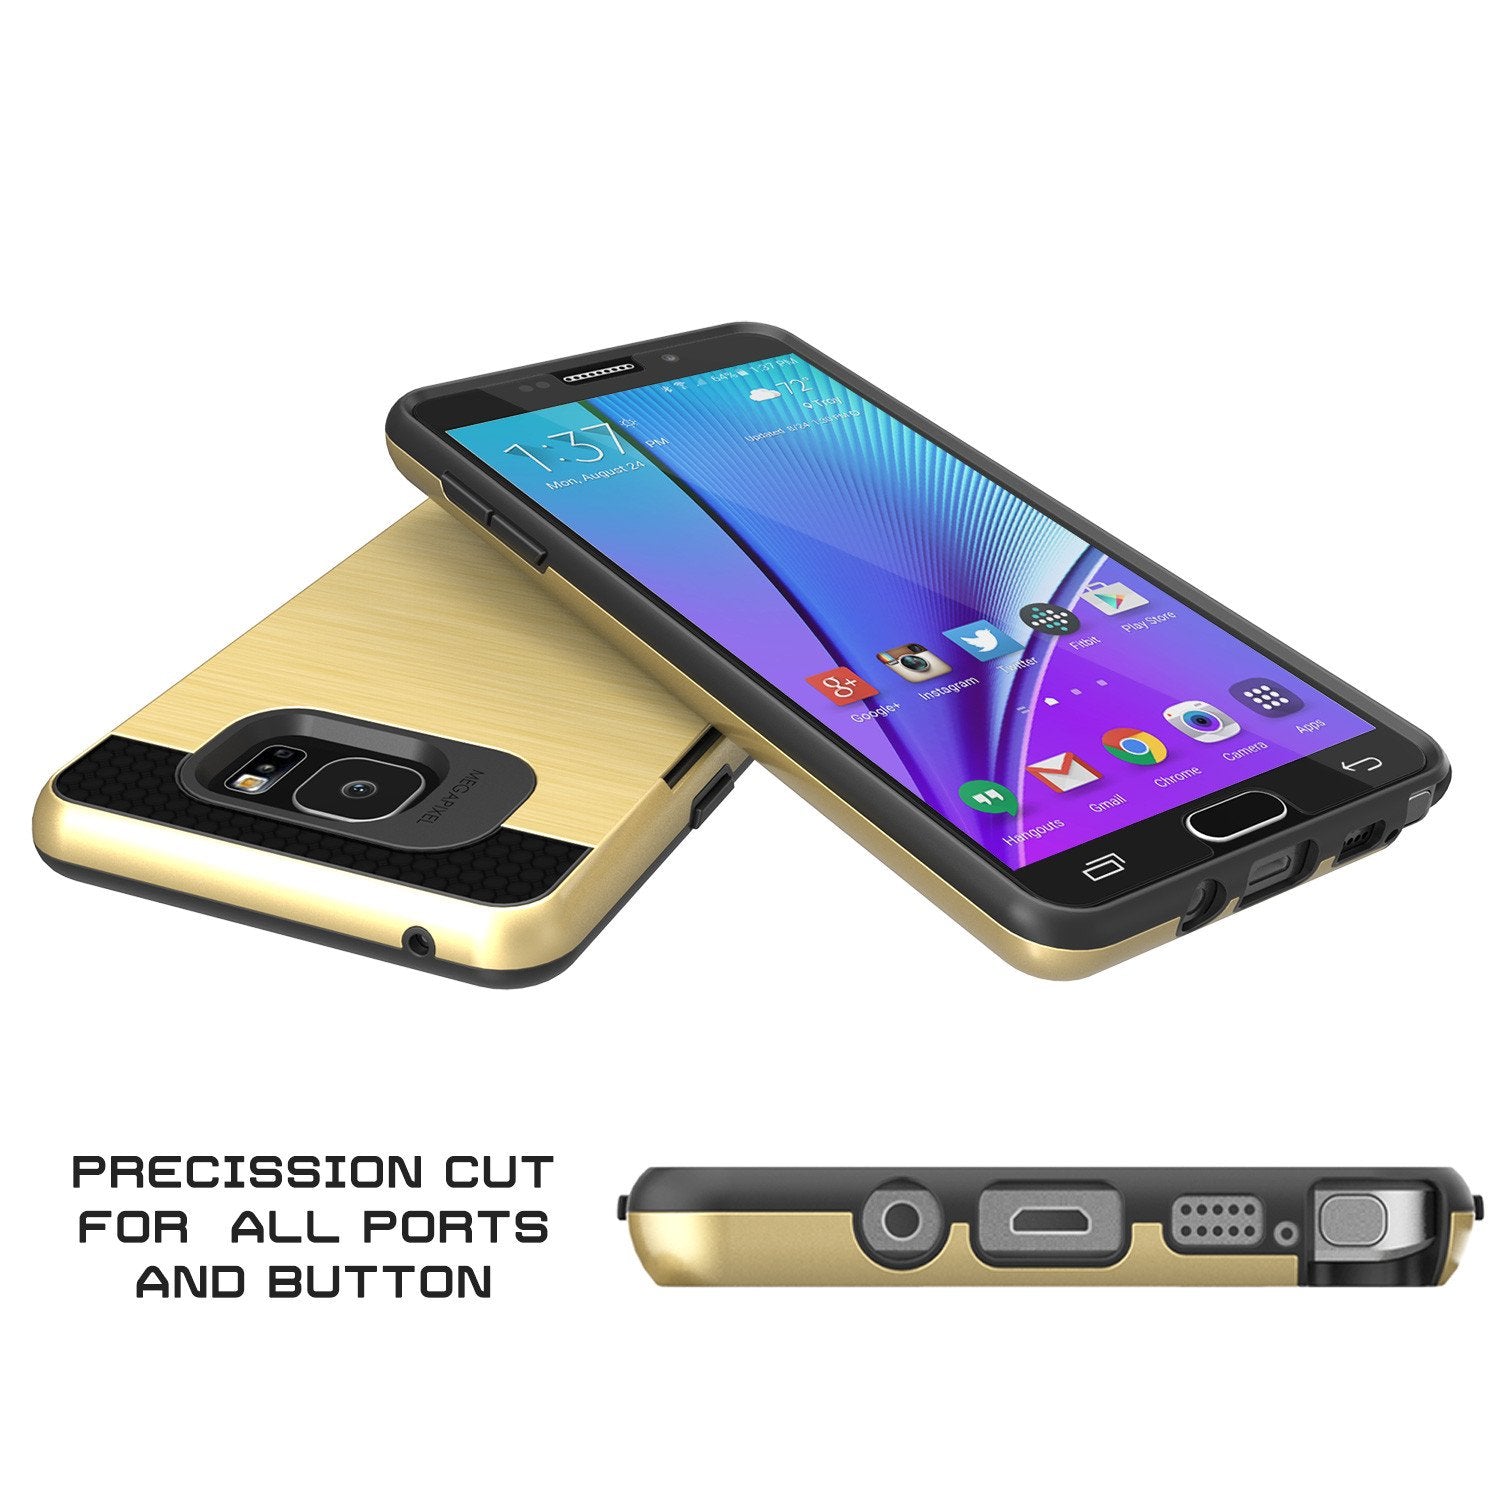 Galaxy Note 5 Case PunkCase SLOT Gold Series Slim Armor Soft Cover Case w/ Tempered Glass